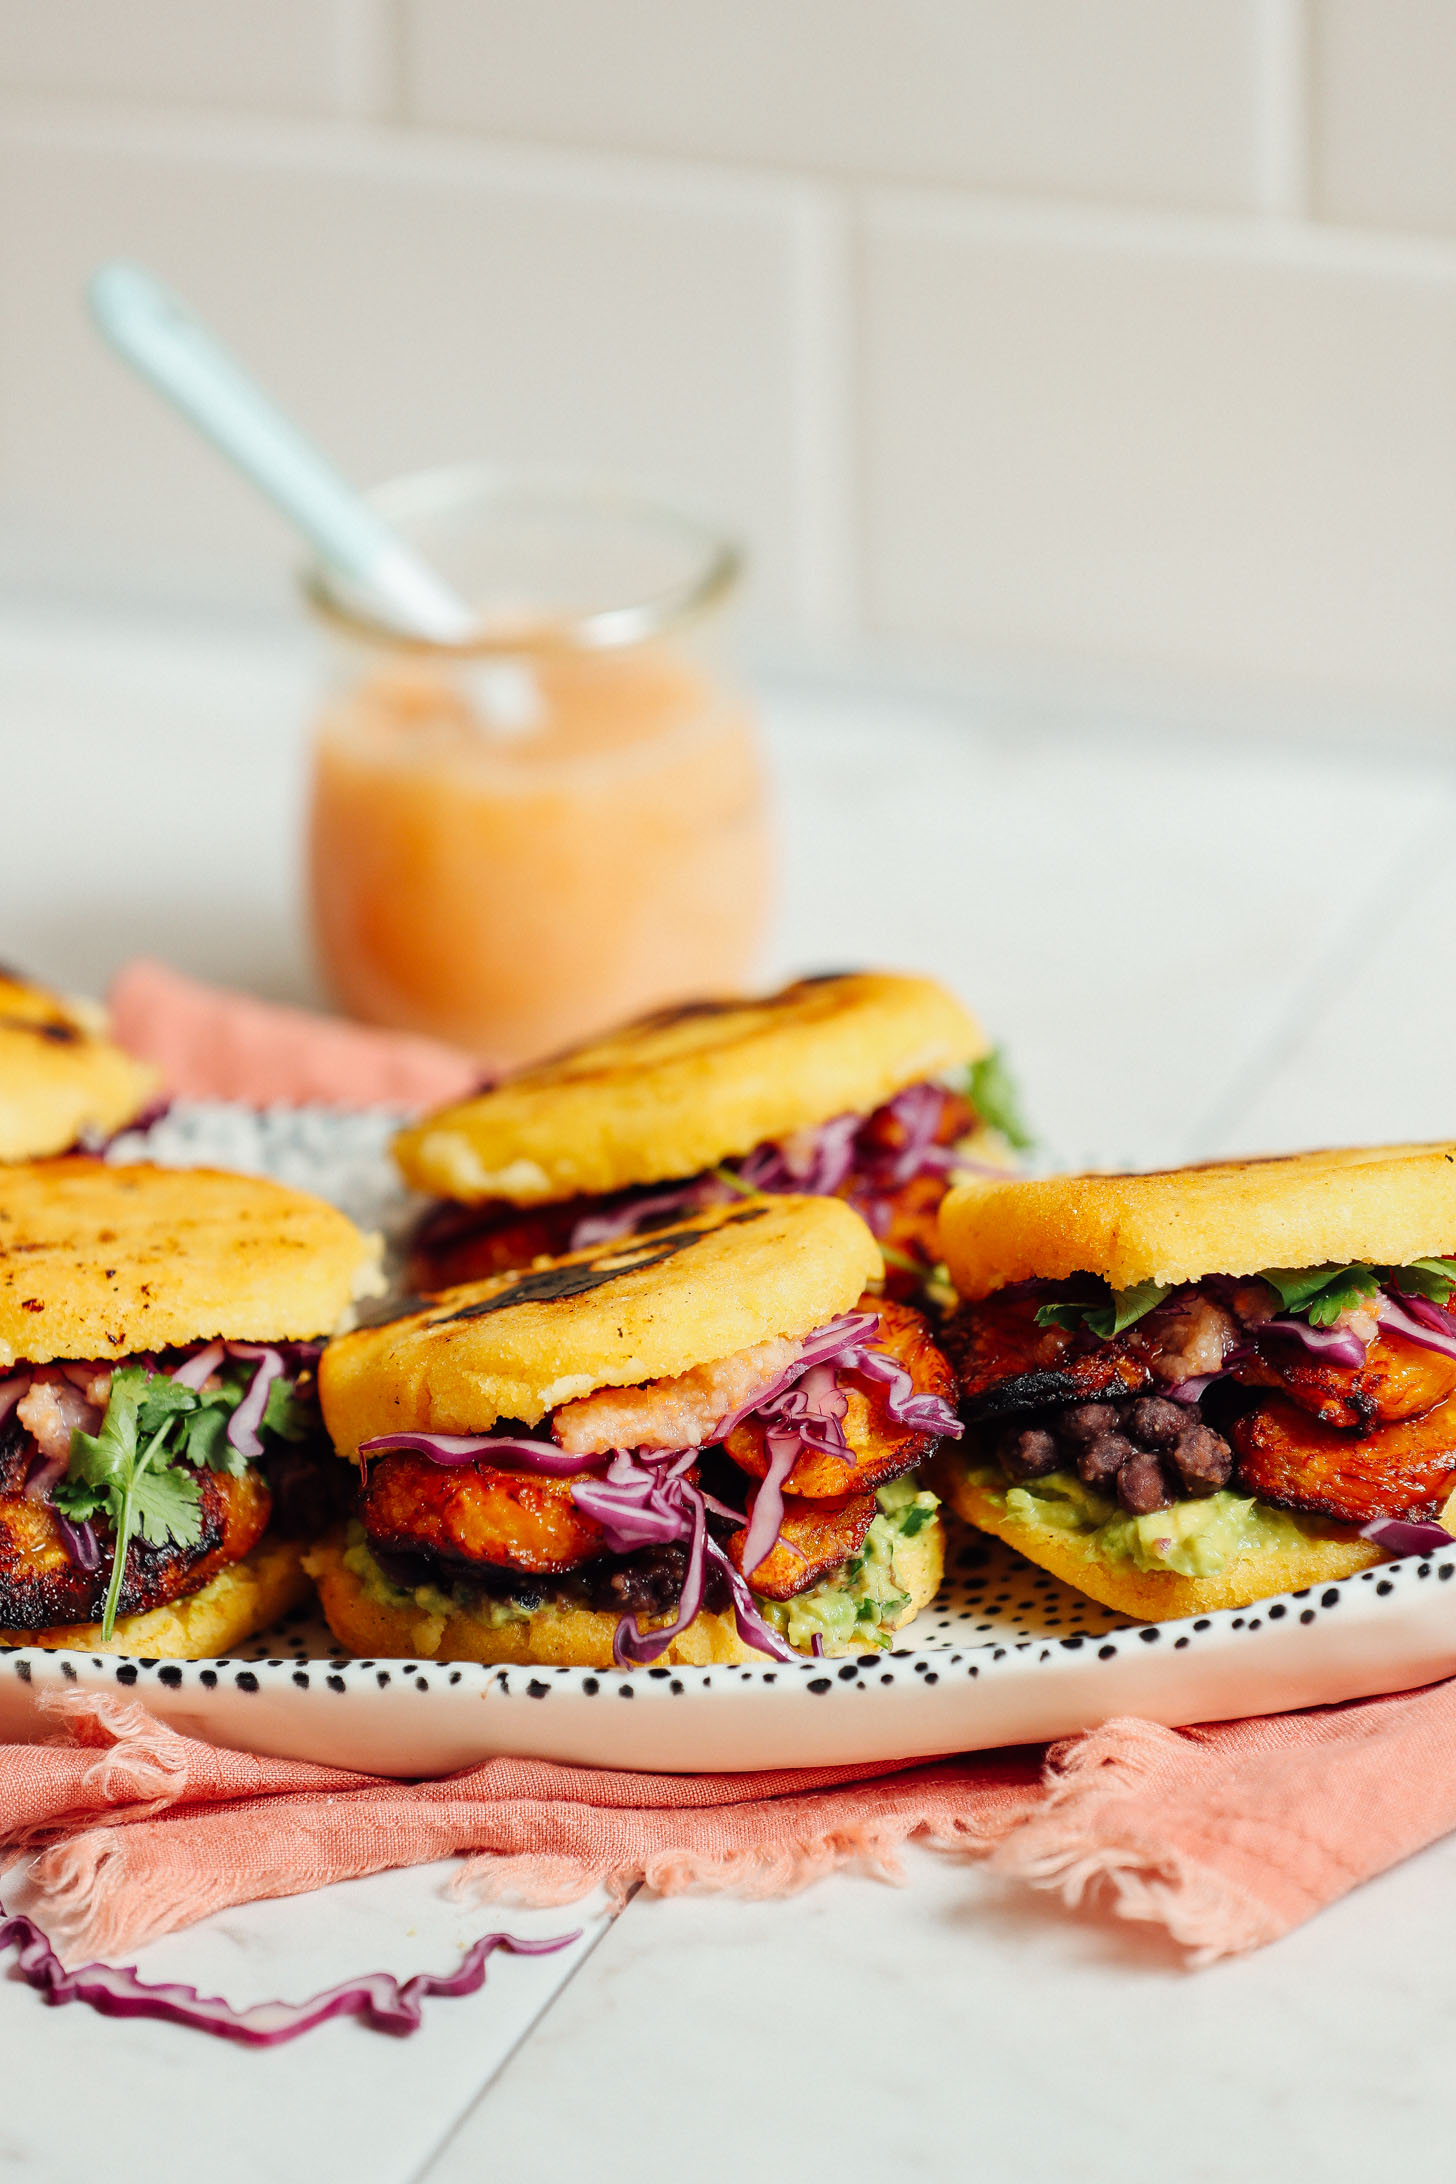 Tray with freshly made Vegan Arepa Sandwiches made with Plantains, Black Beans, and Guacamole